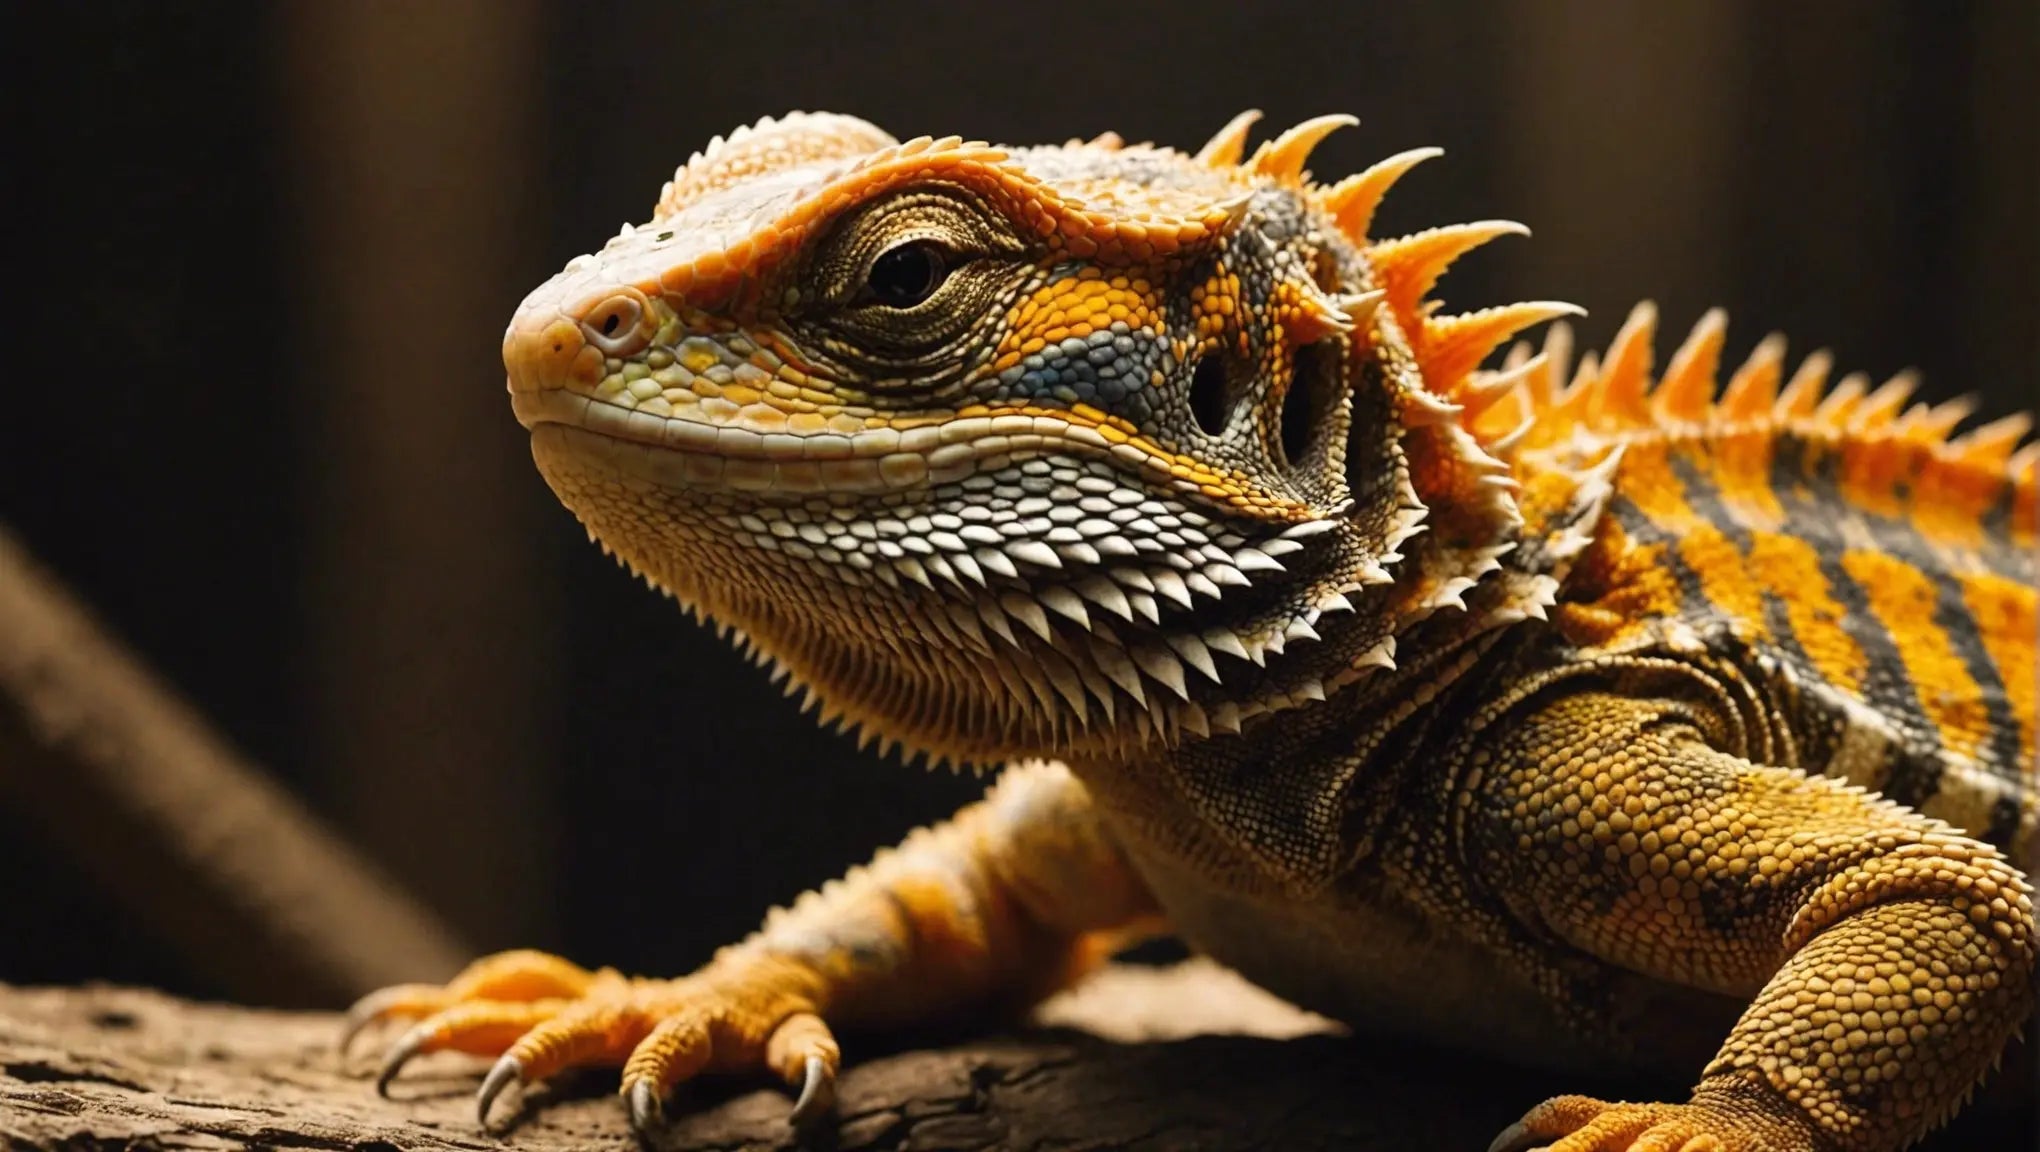 Enhance Your Bearded Dragon's Habitat with the Best Lighting Options